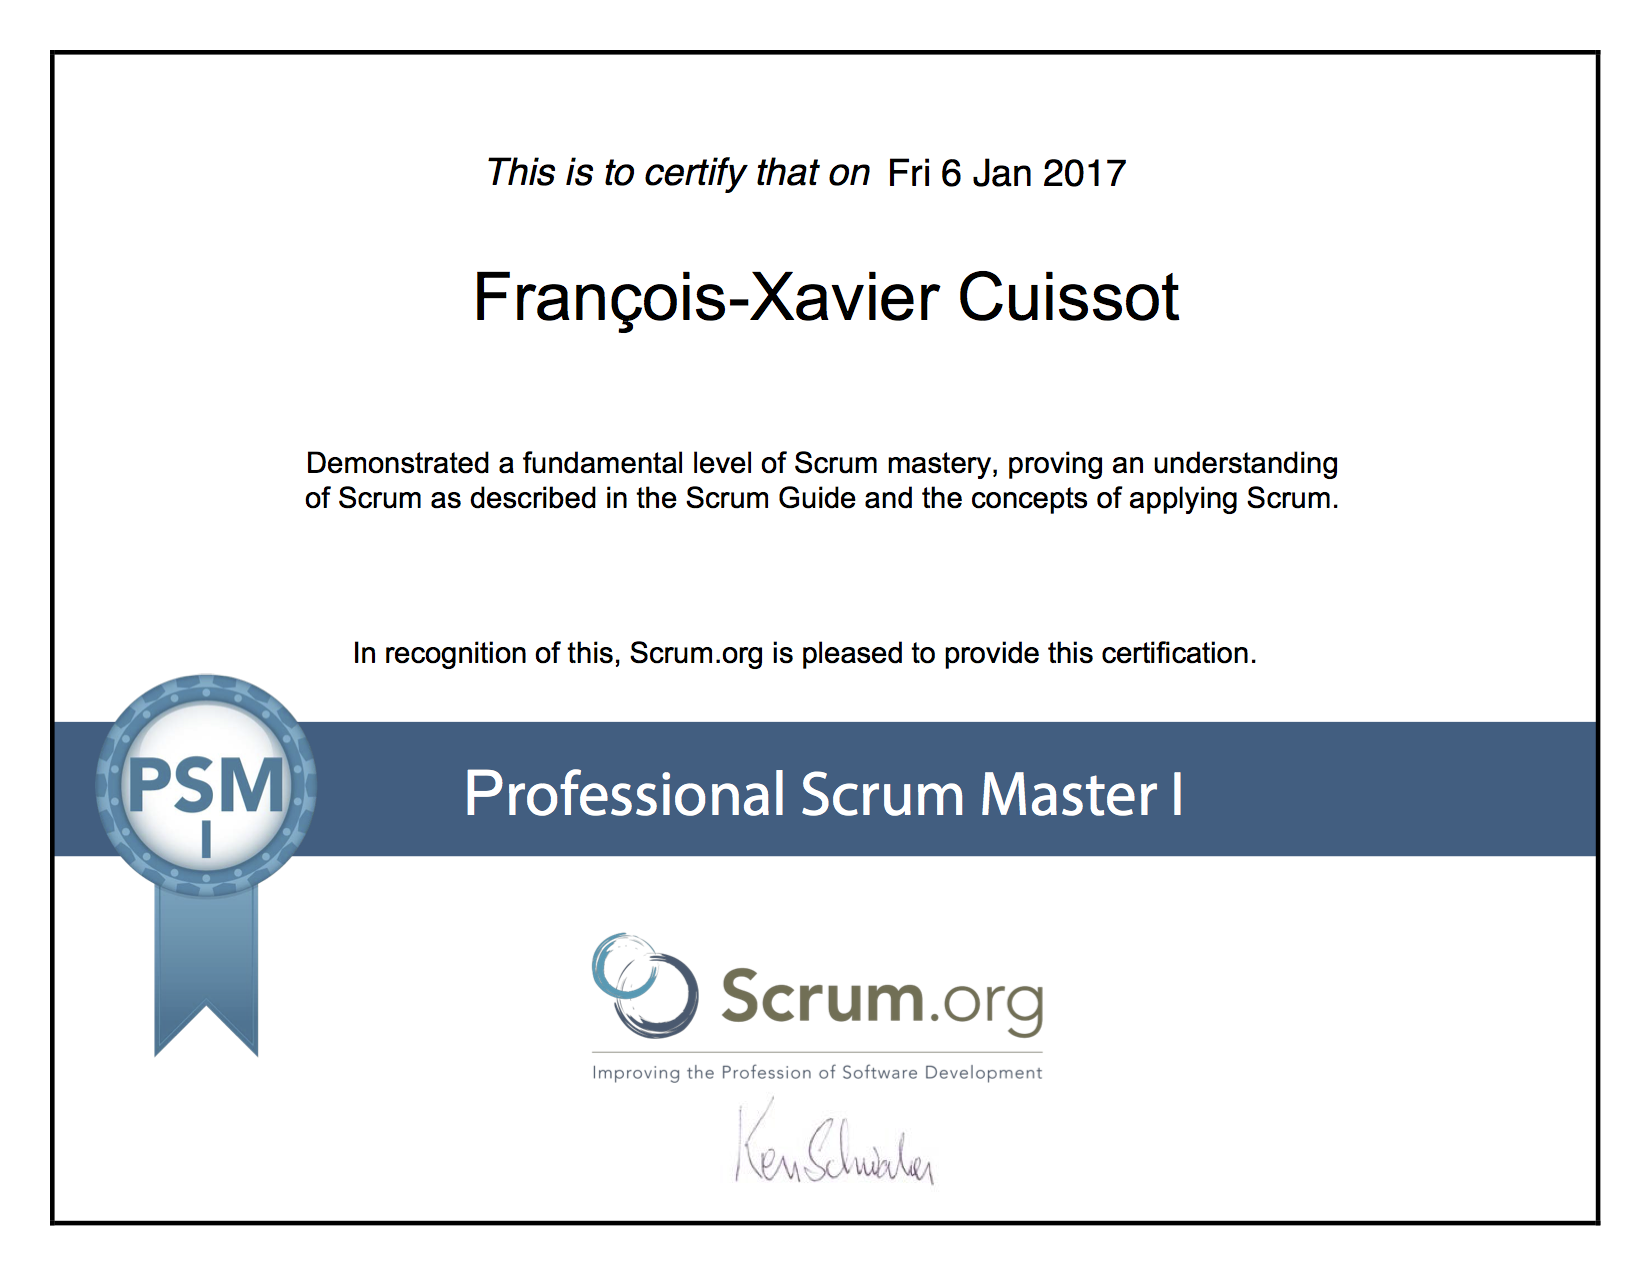 Scrum Certifications | Professional Scrum Master I Francois-Xavier Cuissot